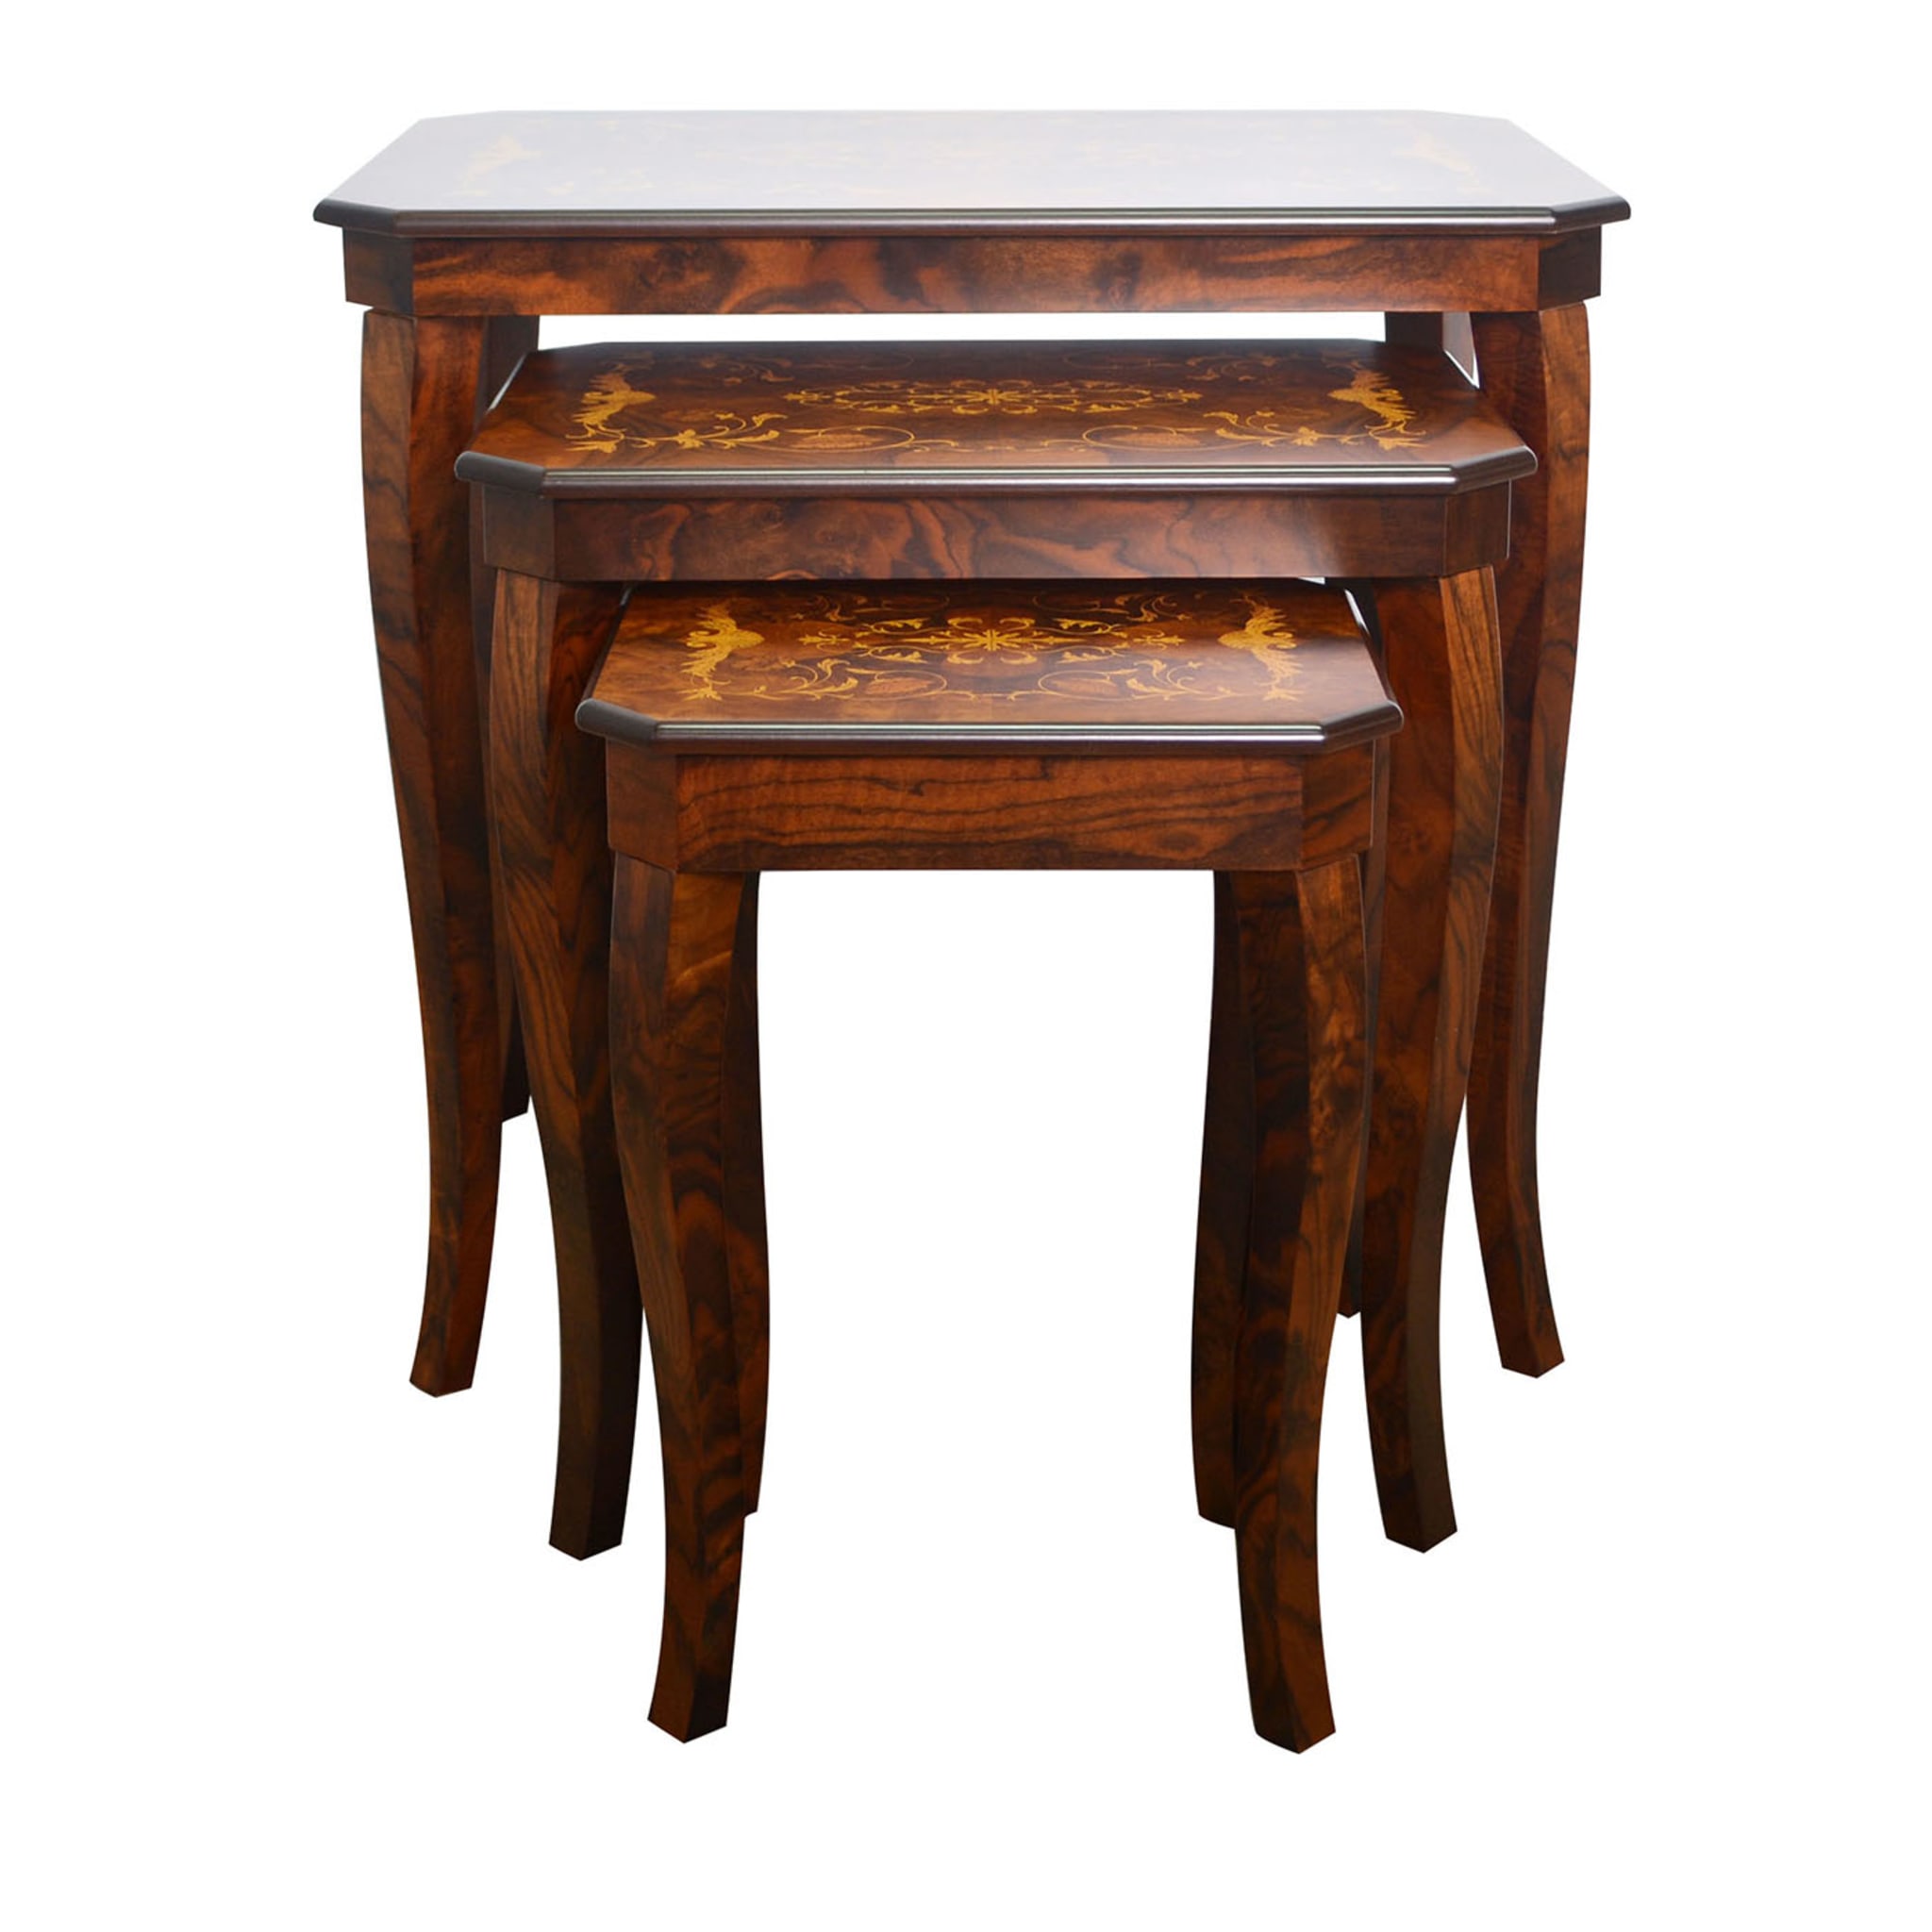 Set of 3 Musical Floral Walnut Briar Nesting Tables #1 - Main view